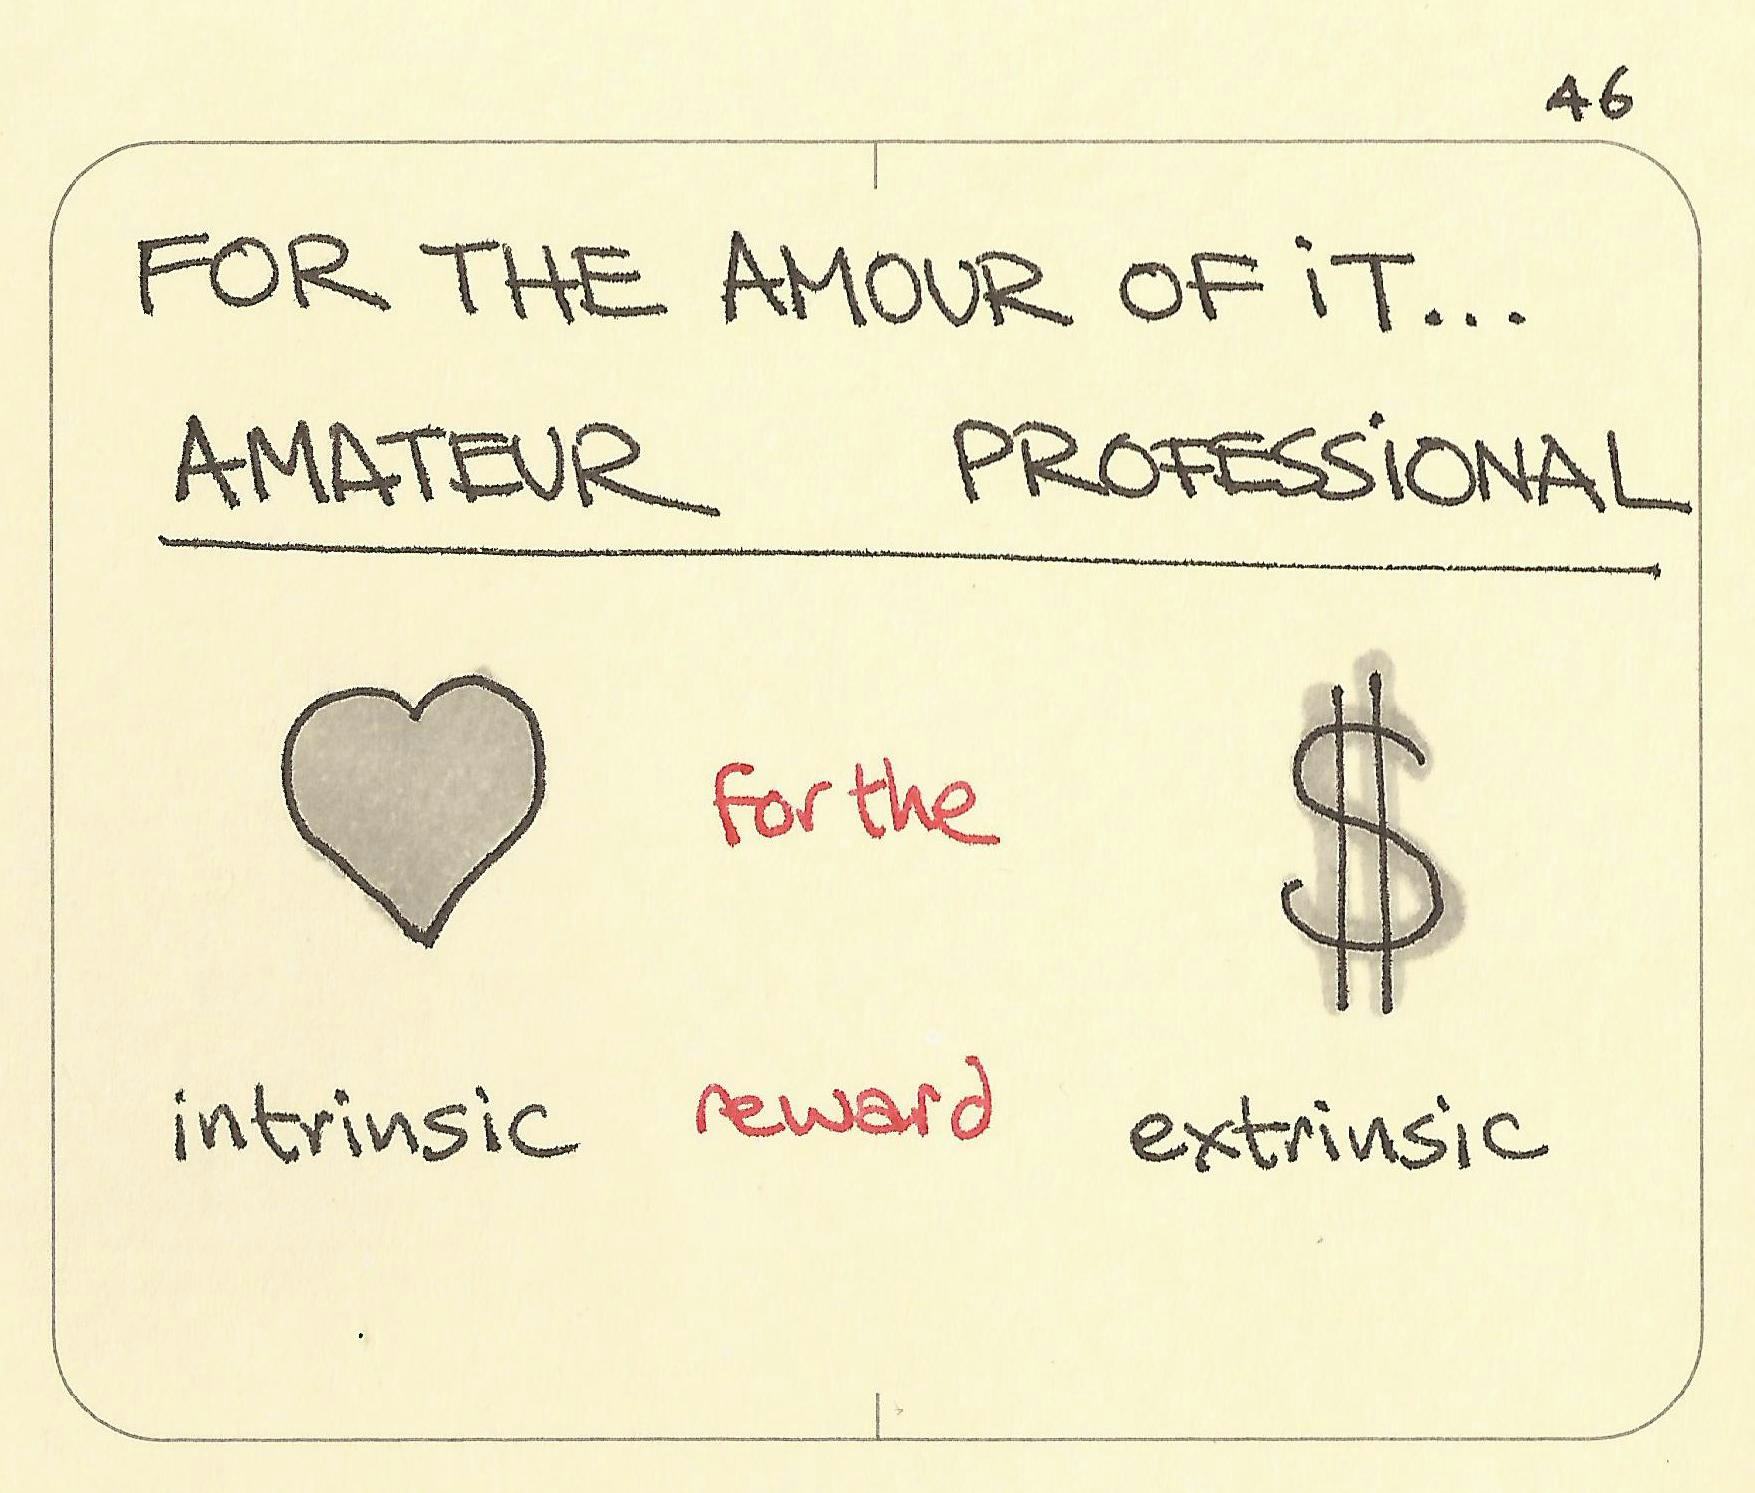 For the amour of it - Sketchplanations